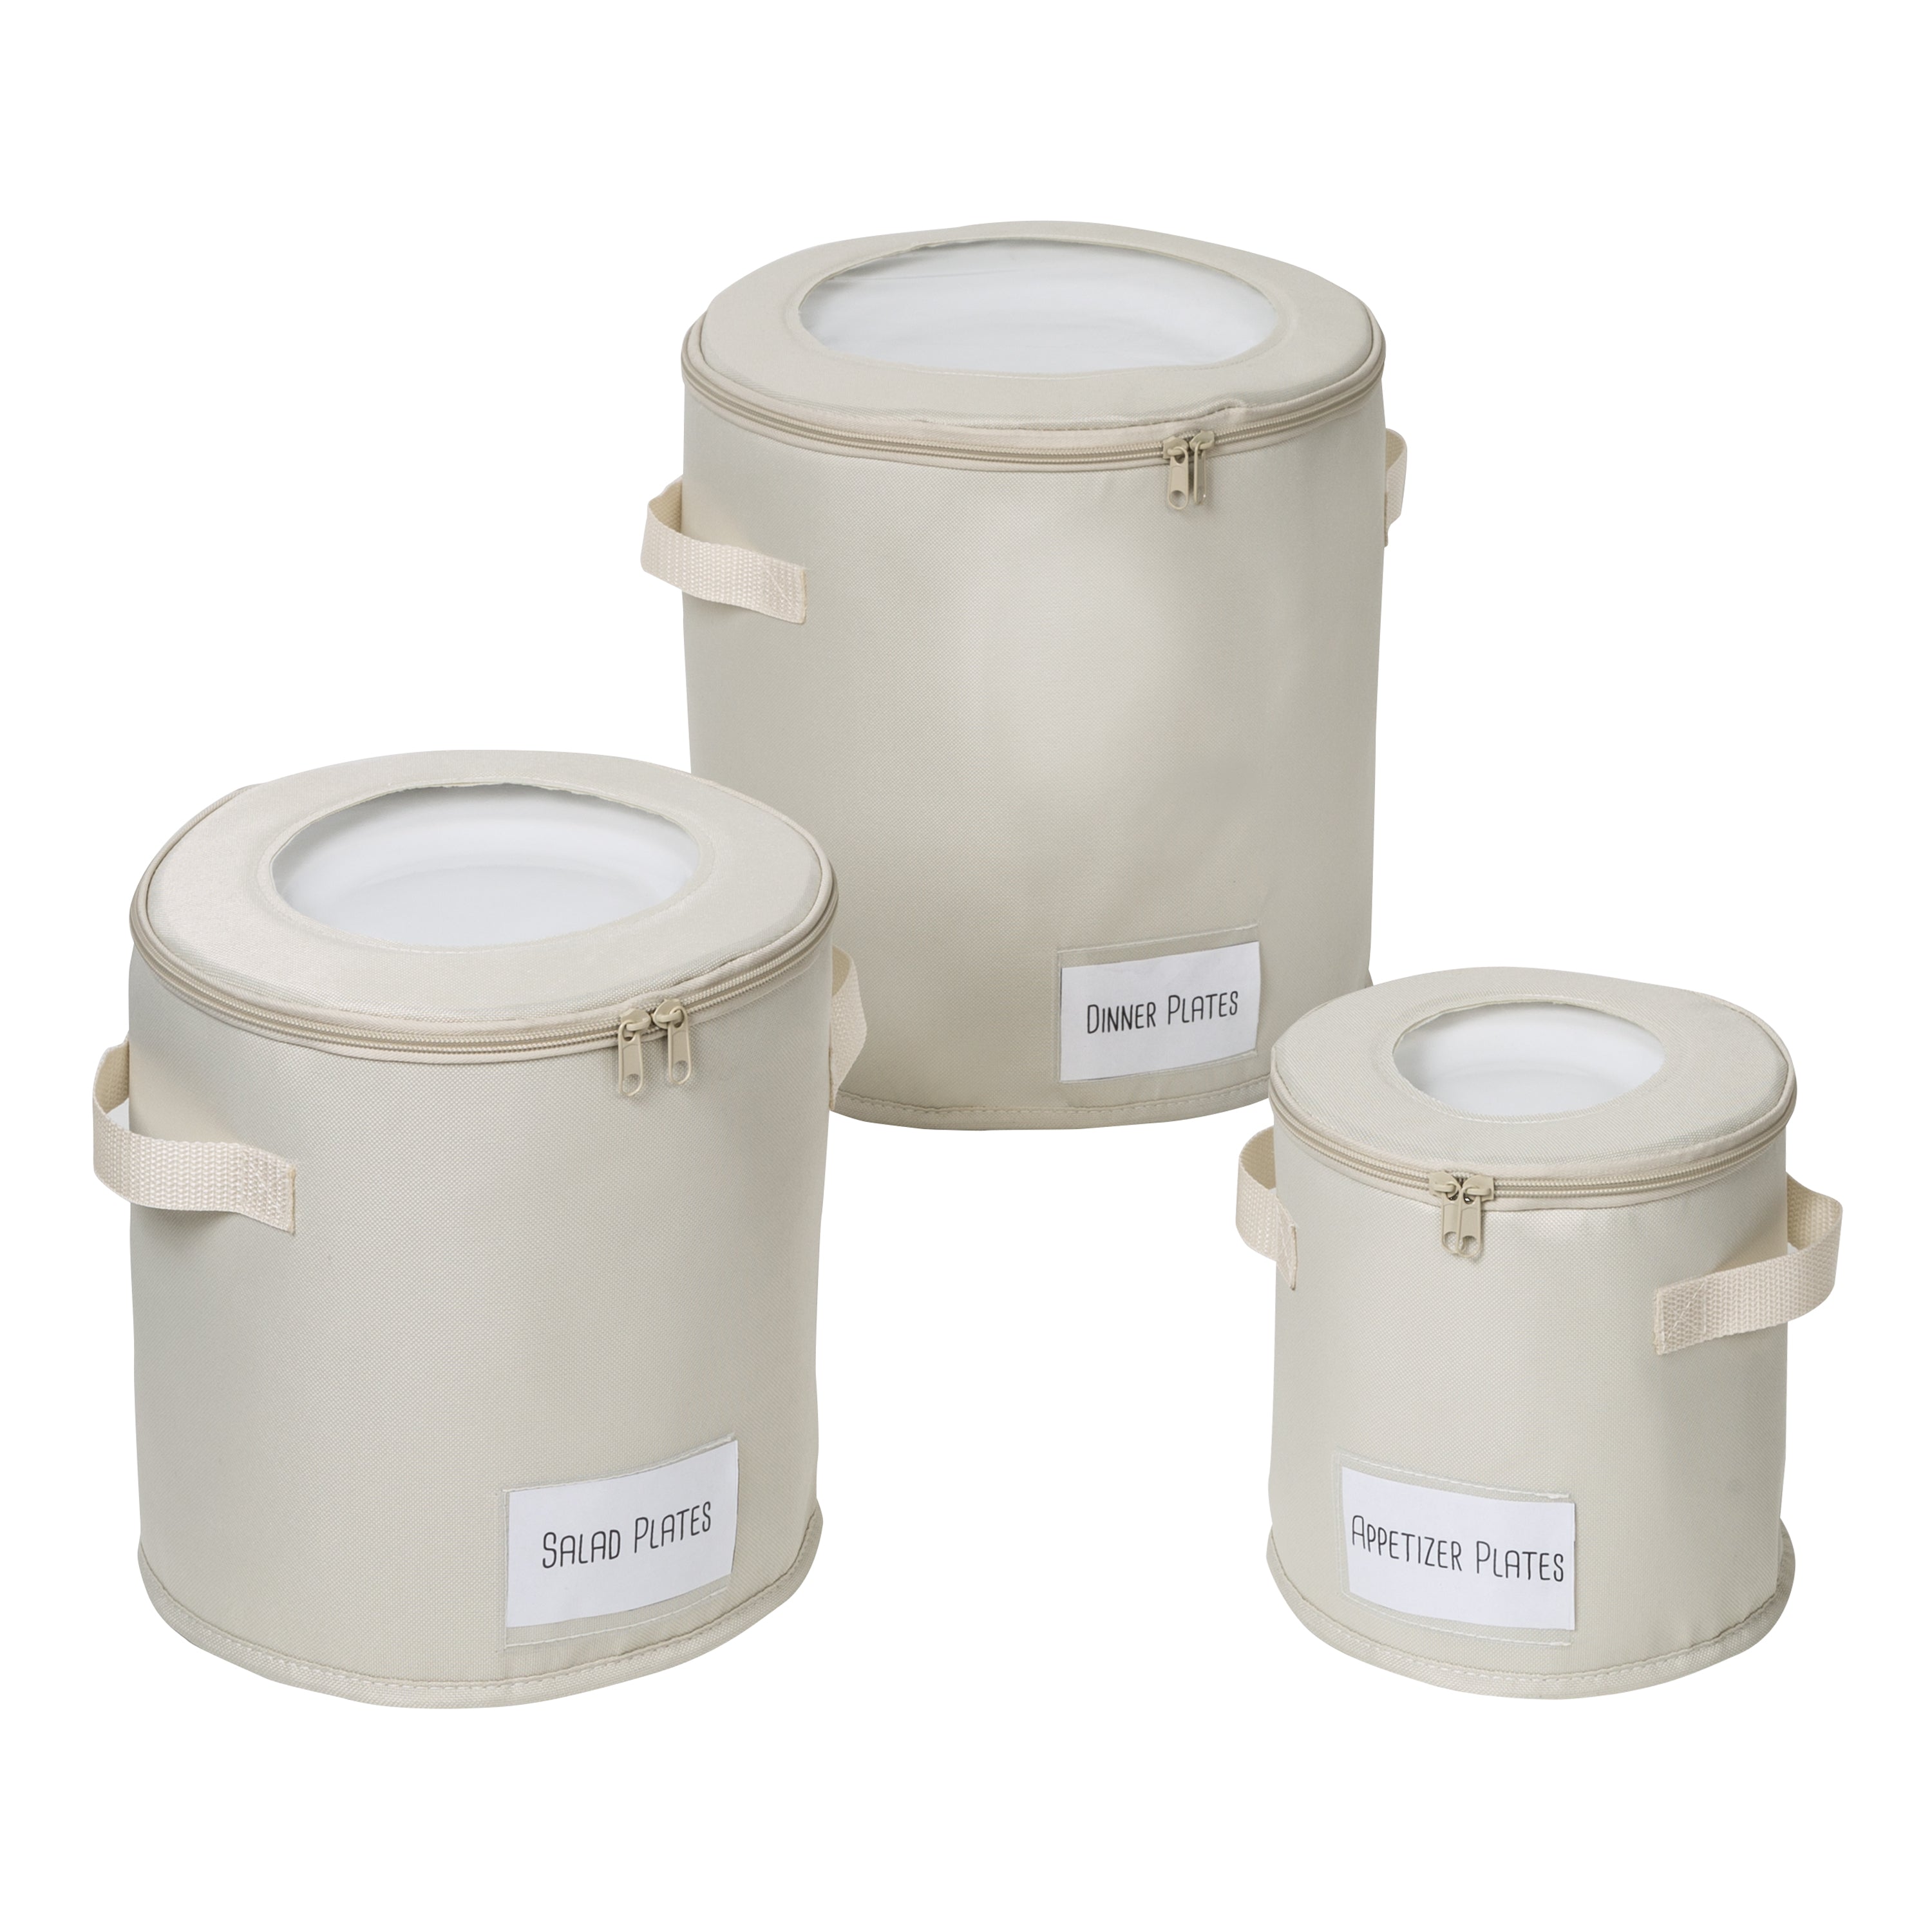 Honey Can Do Round Dinnerware Storage Boxes, Set of 3 - Natural